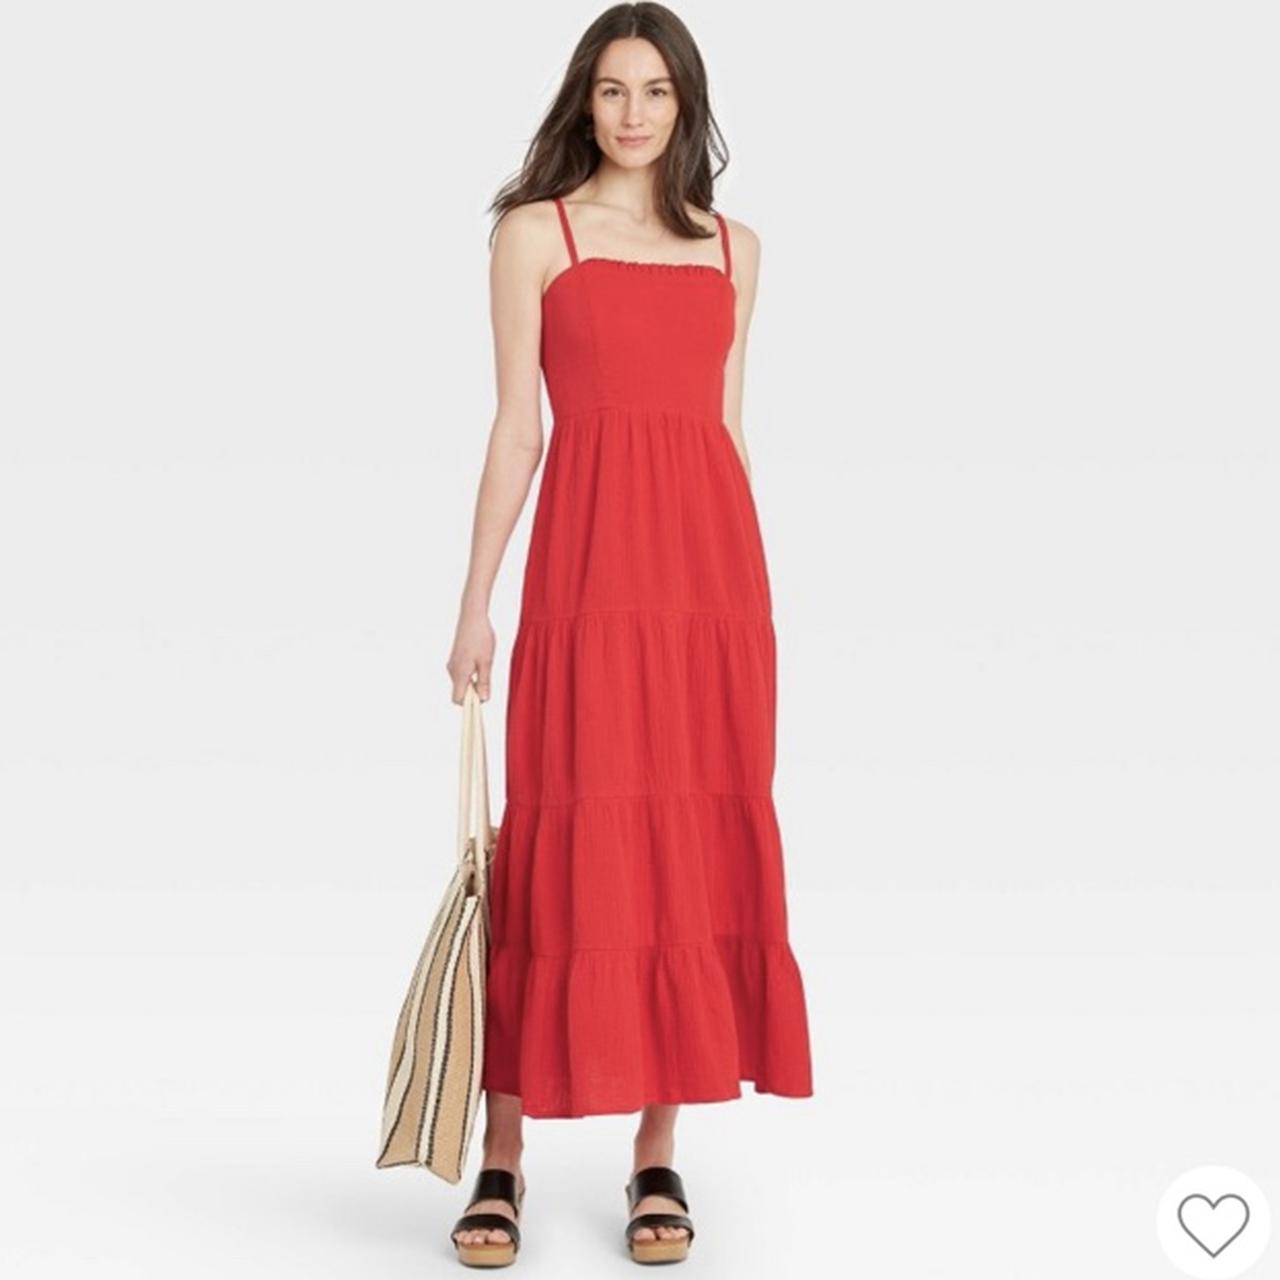 Knox Rose Sleeveless Tiered Dress in Red